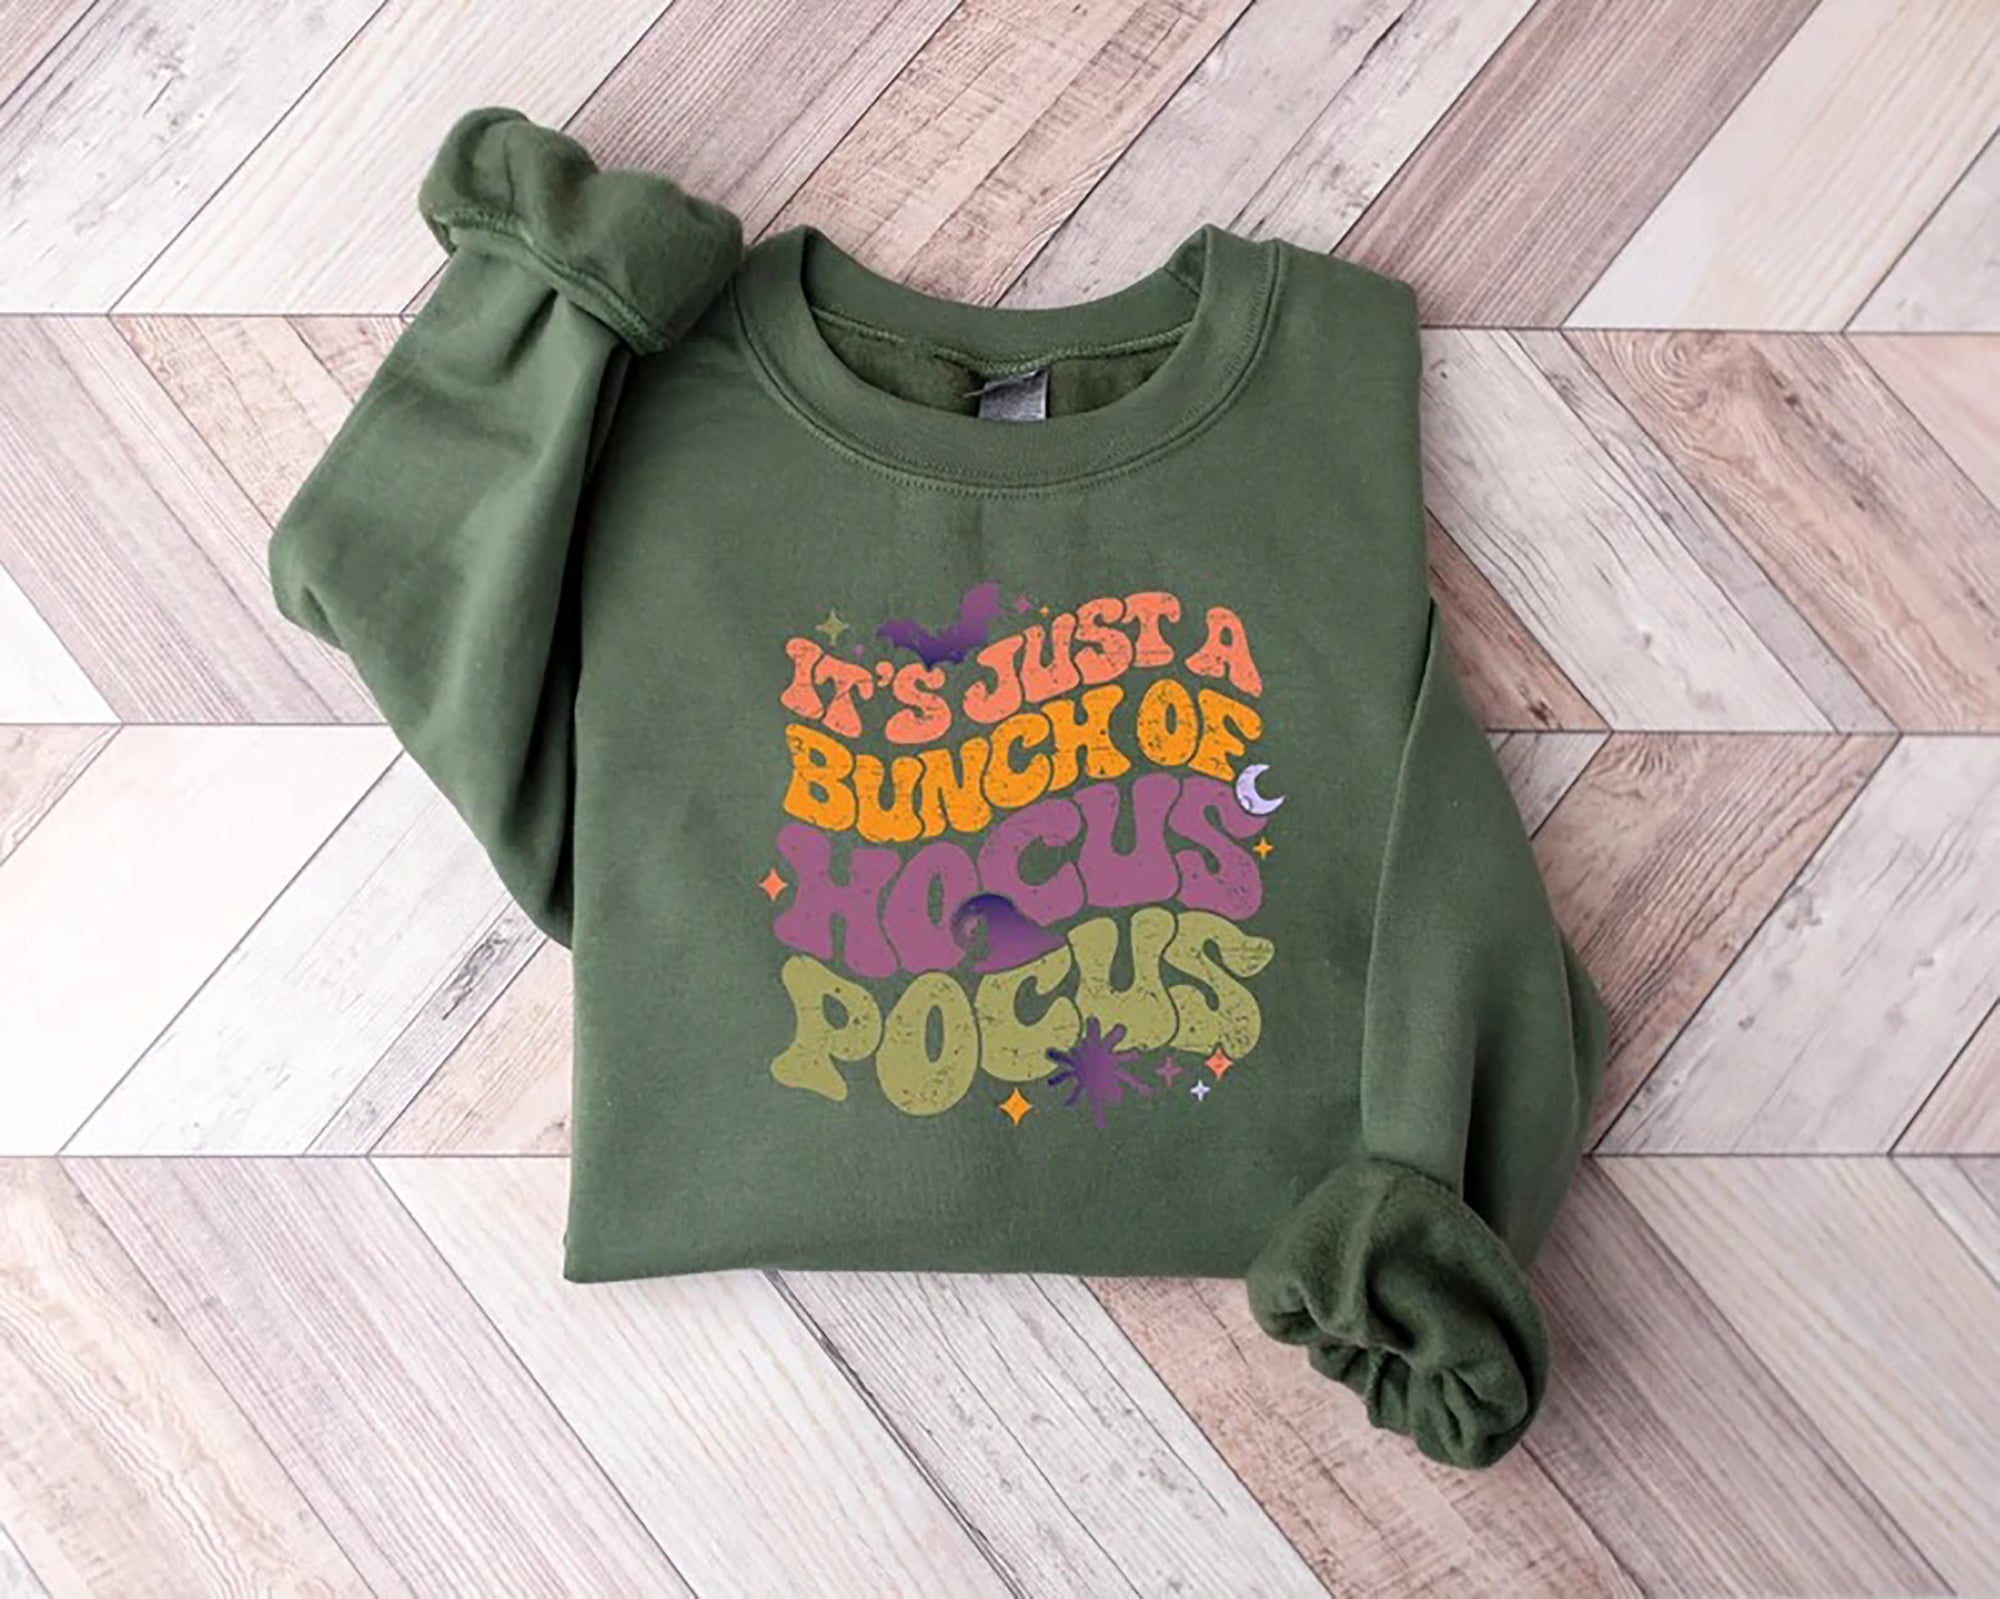 Skitongift Its Just A Buhch Of Hocus Pocus T-Shirt Women Halloween T-Shirt,Hocus Pocus T-Shirt,Sanderson Sisters T-Shirt,Halloween Party Gifts